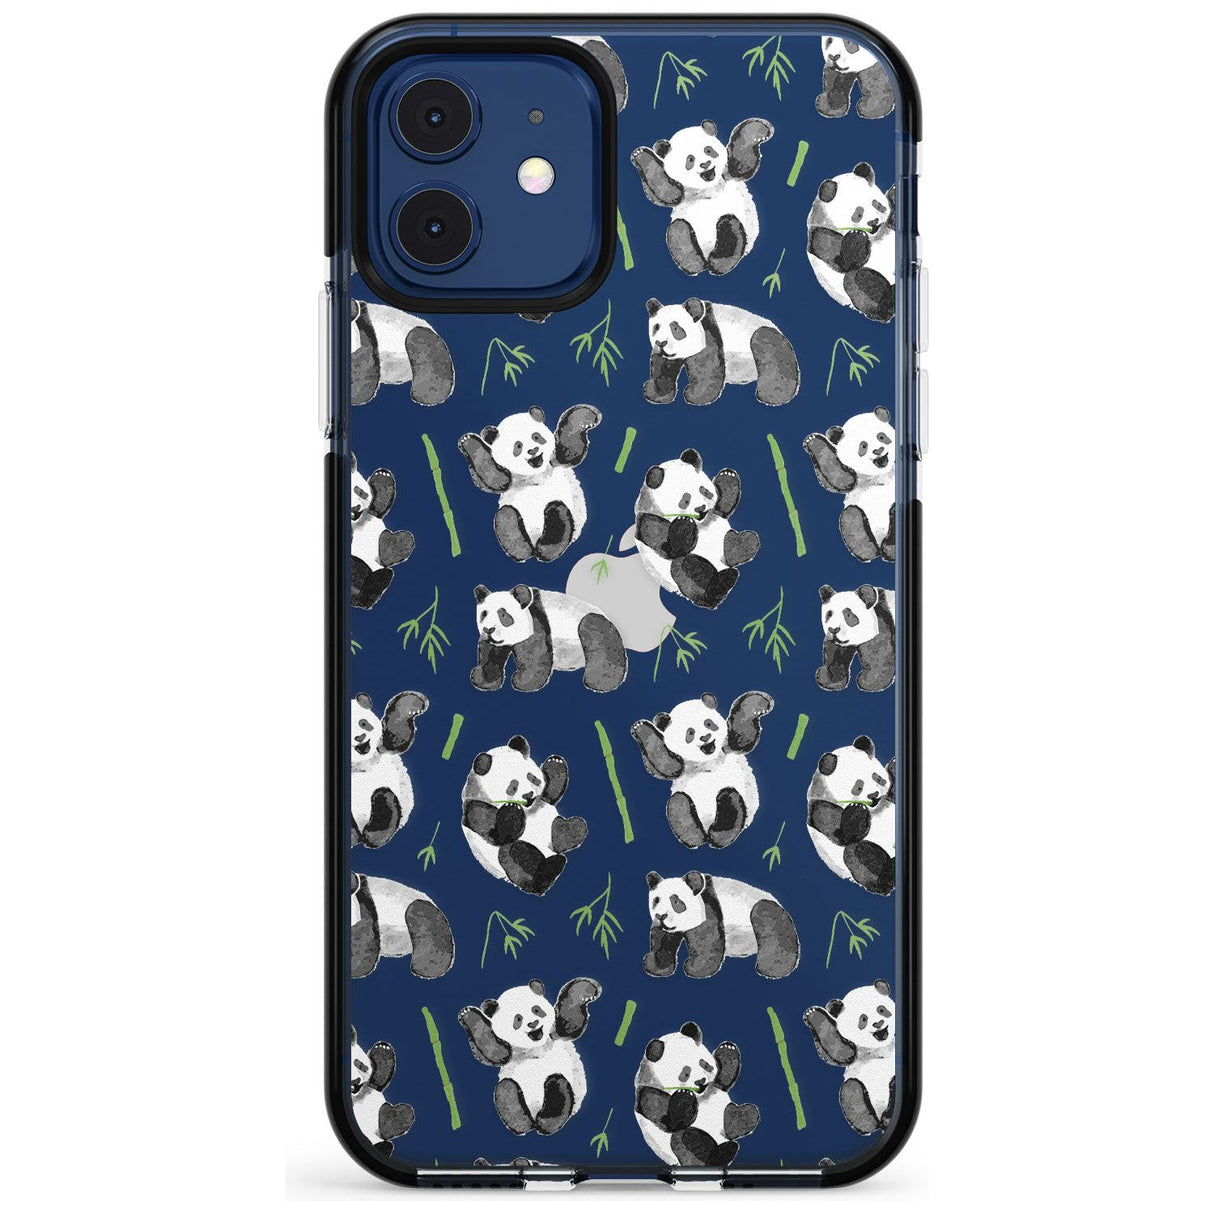 Watercolour Panda Pattern Pink Fade Impact Phone Case for iPhone 11 Pro Max